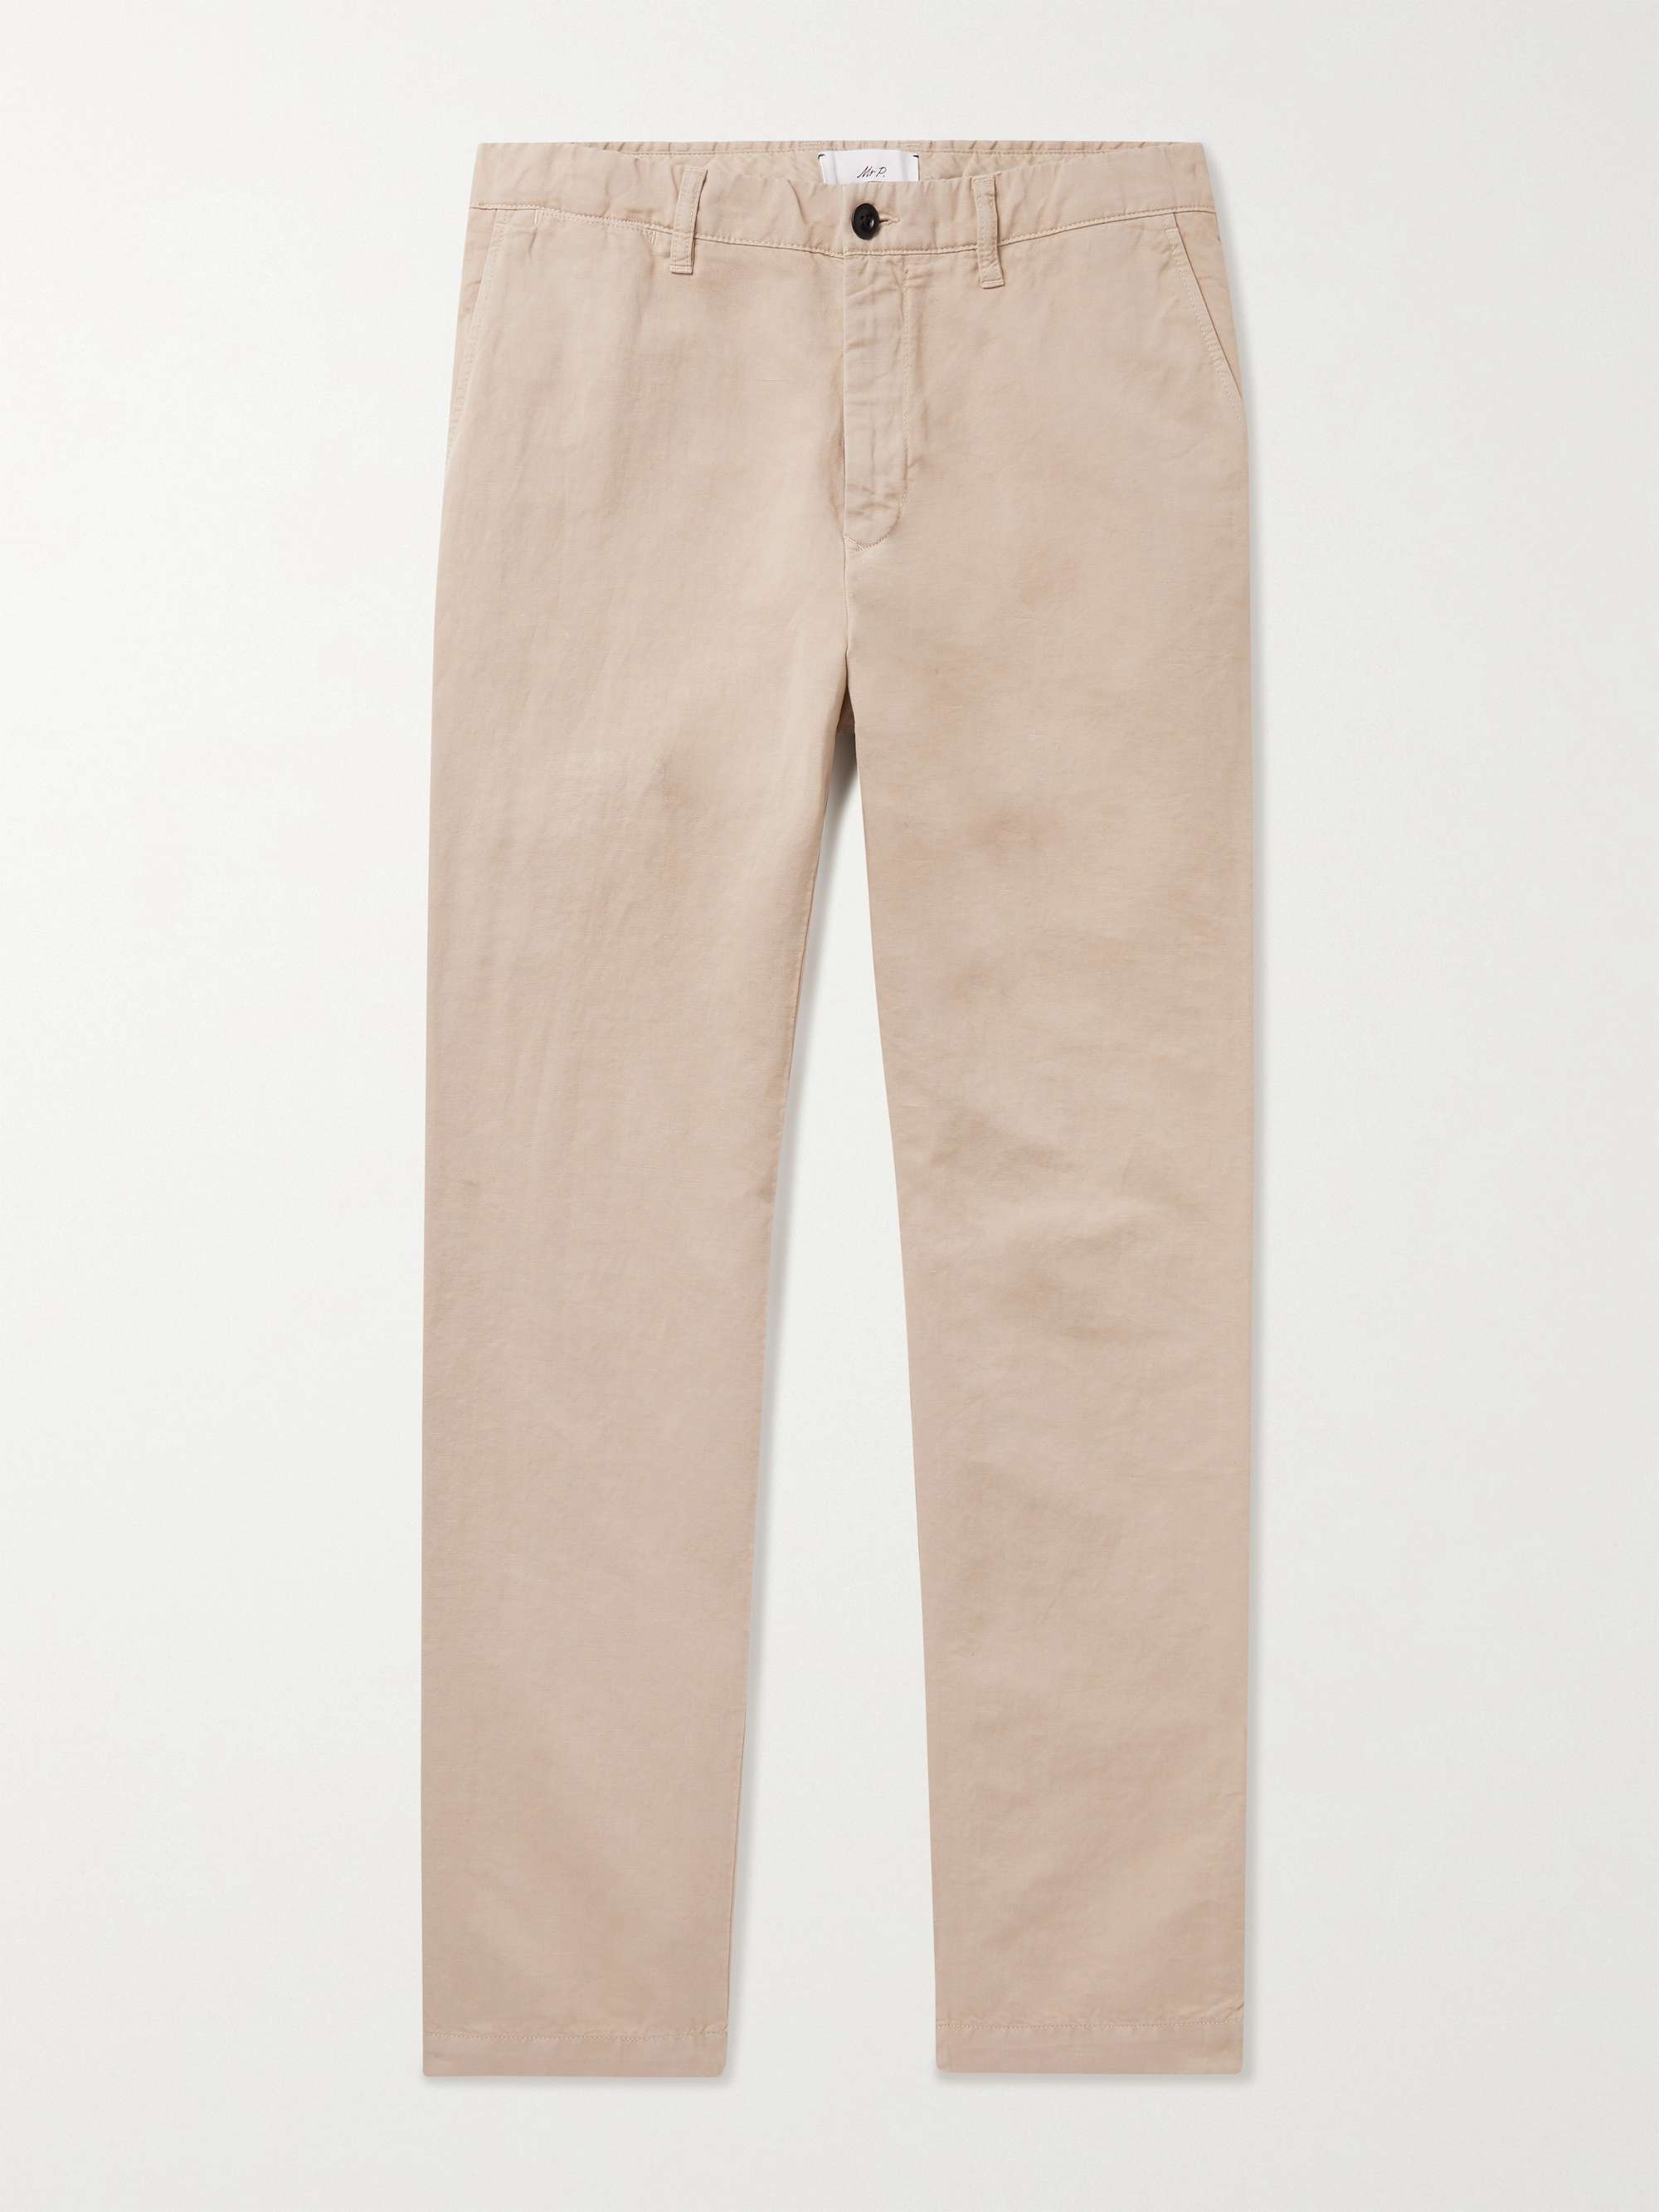 MR P. Cotton and Linen-Blend Twill Chinos